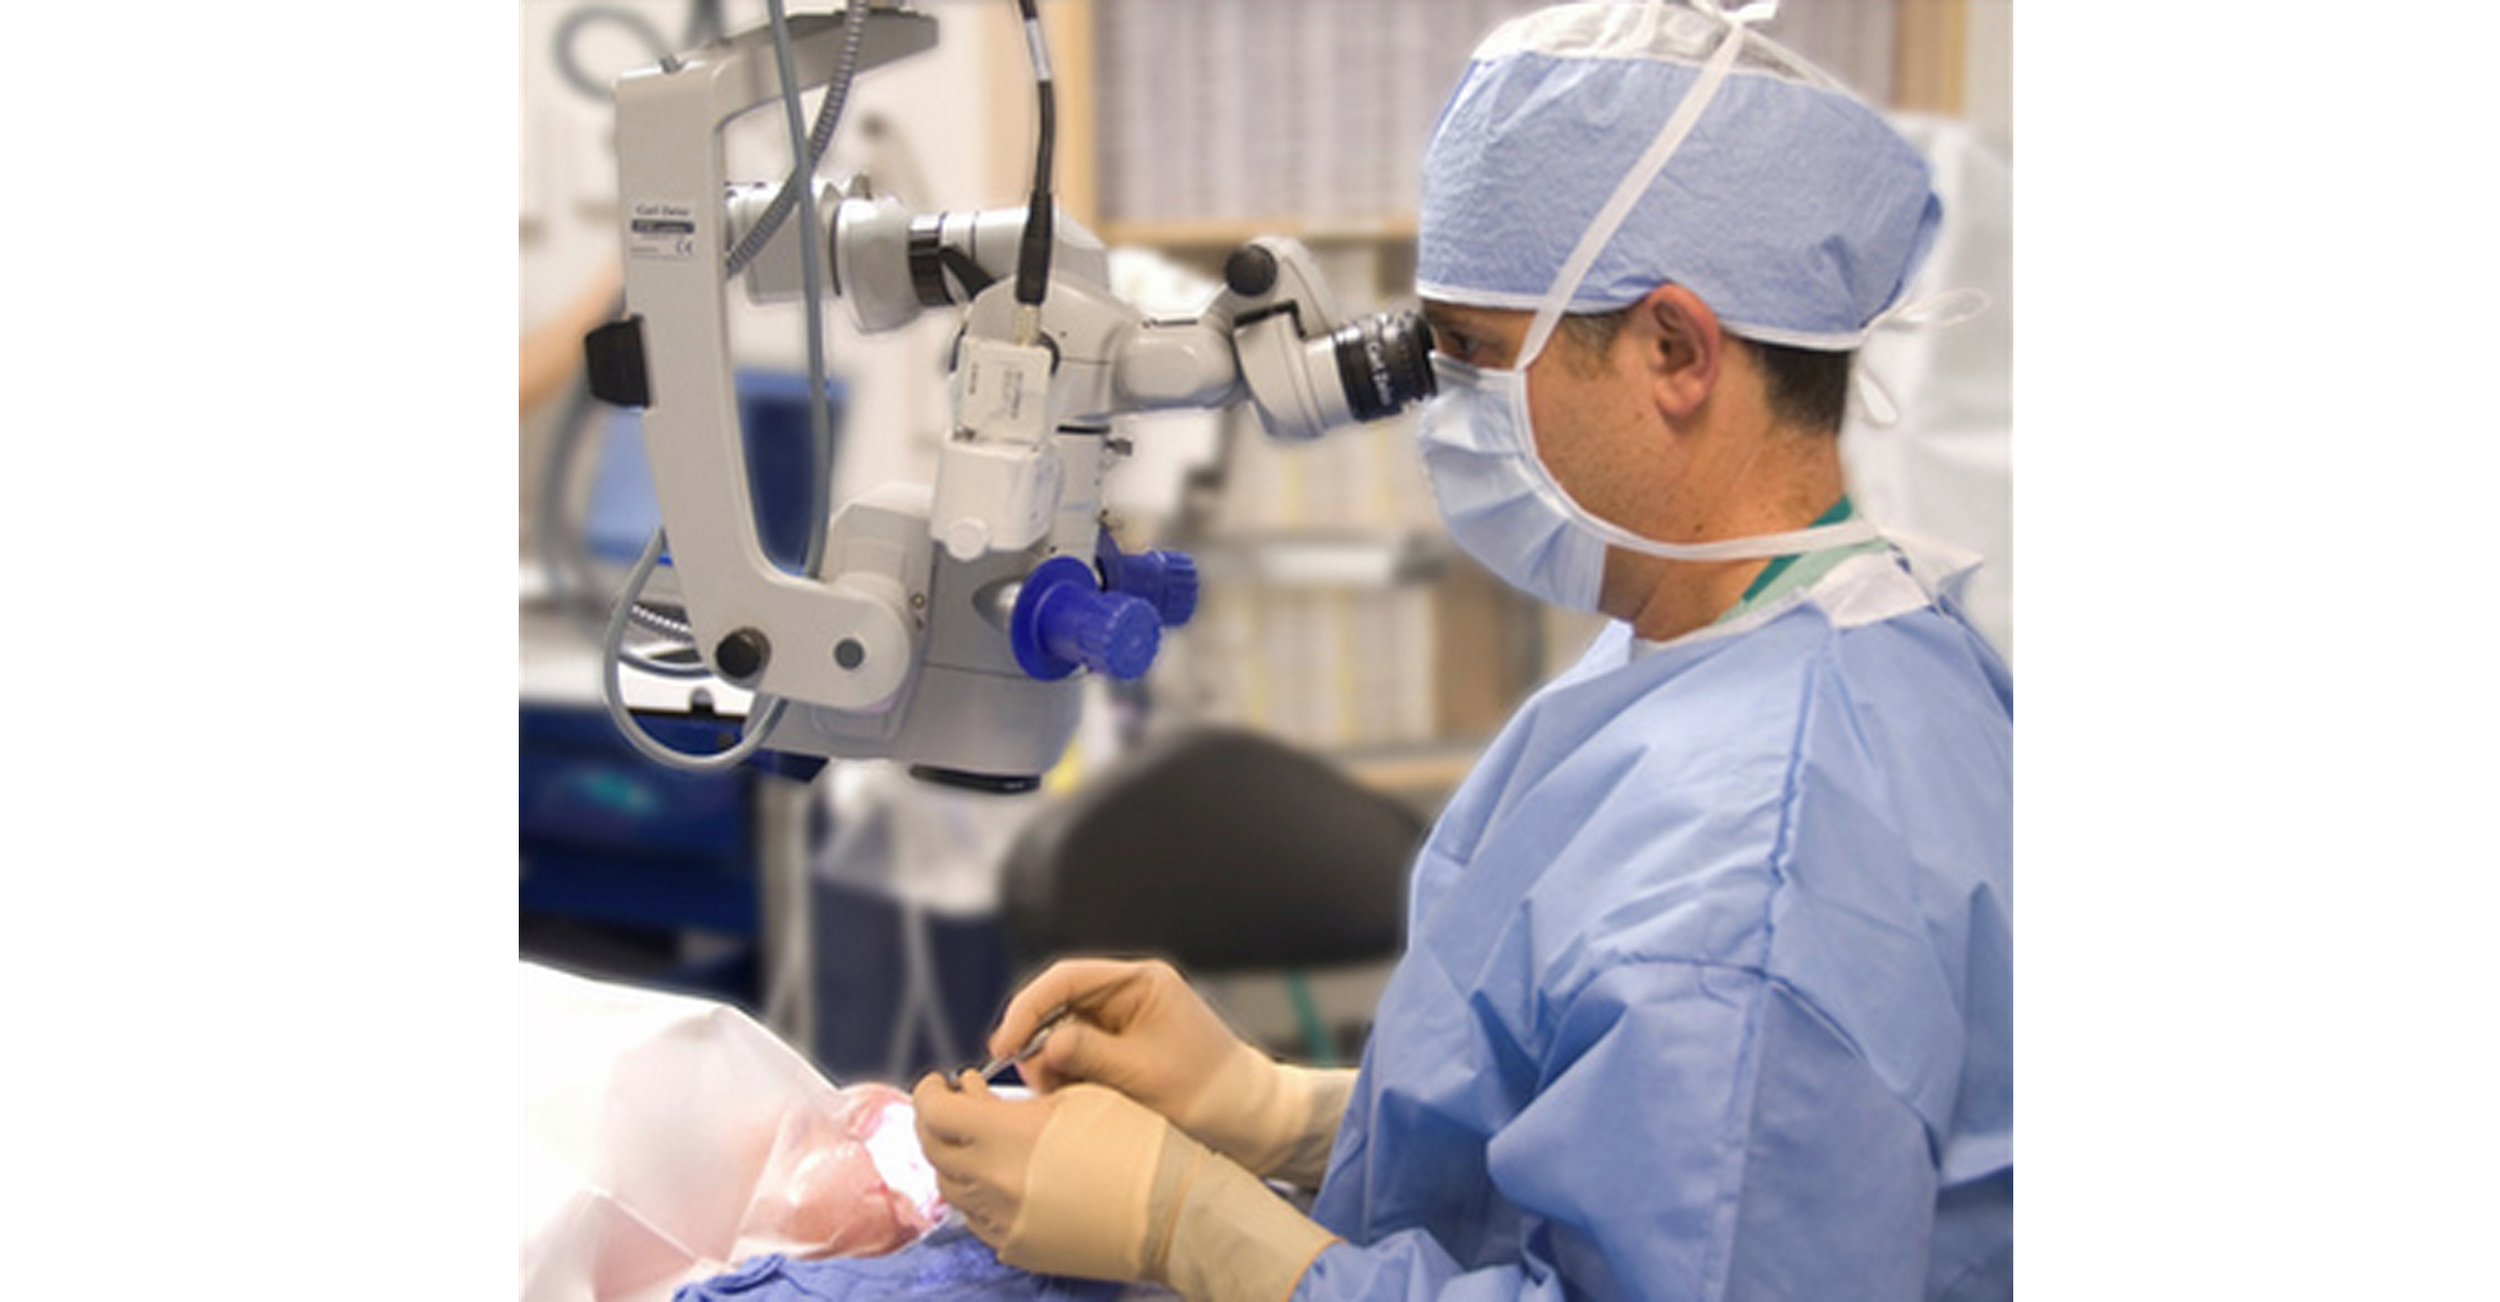   That’s because there is a very simple operation that fixes cataract blindness, by removing the clouded lens and replacing it with a plastic one.    The operation can be carried out in as little as 4 minutes under local anesthetic.  